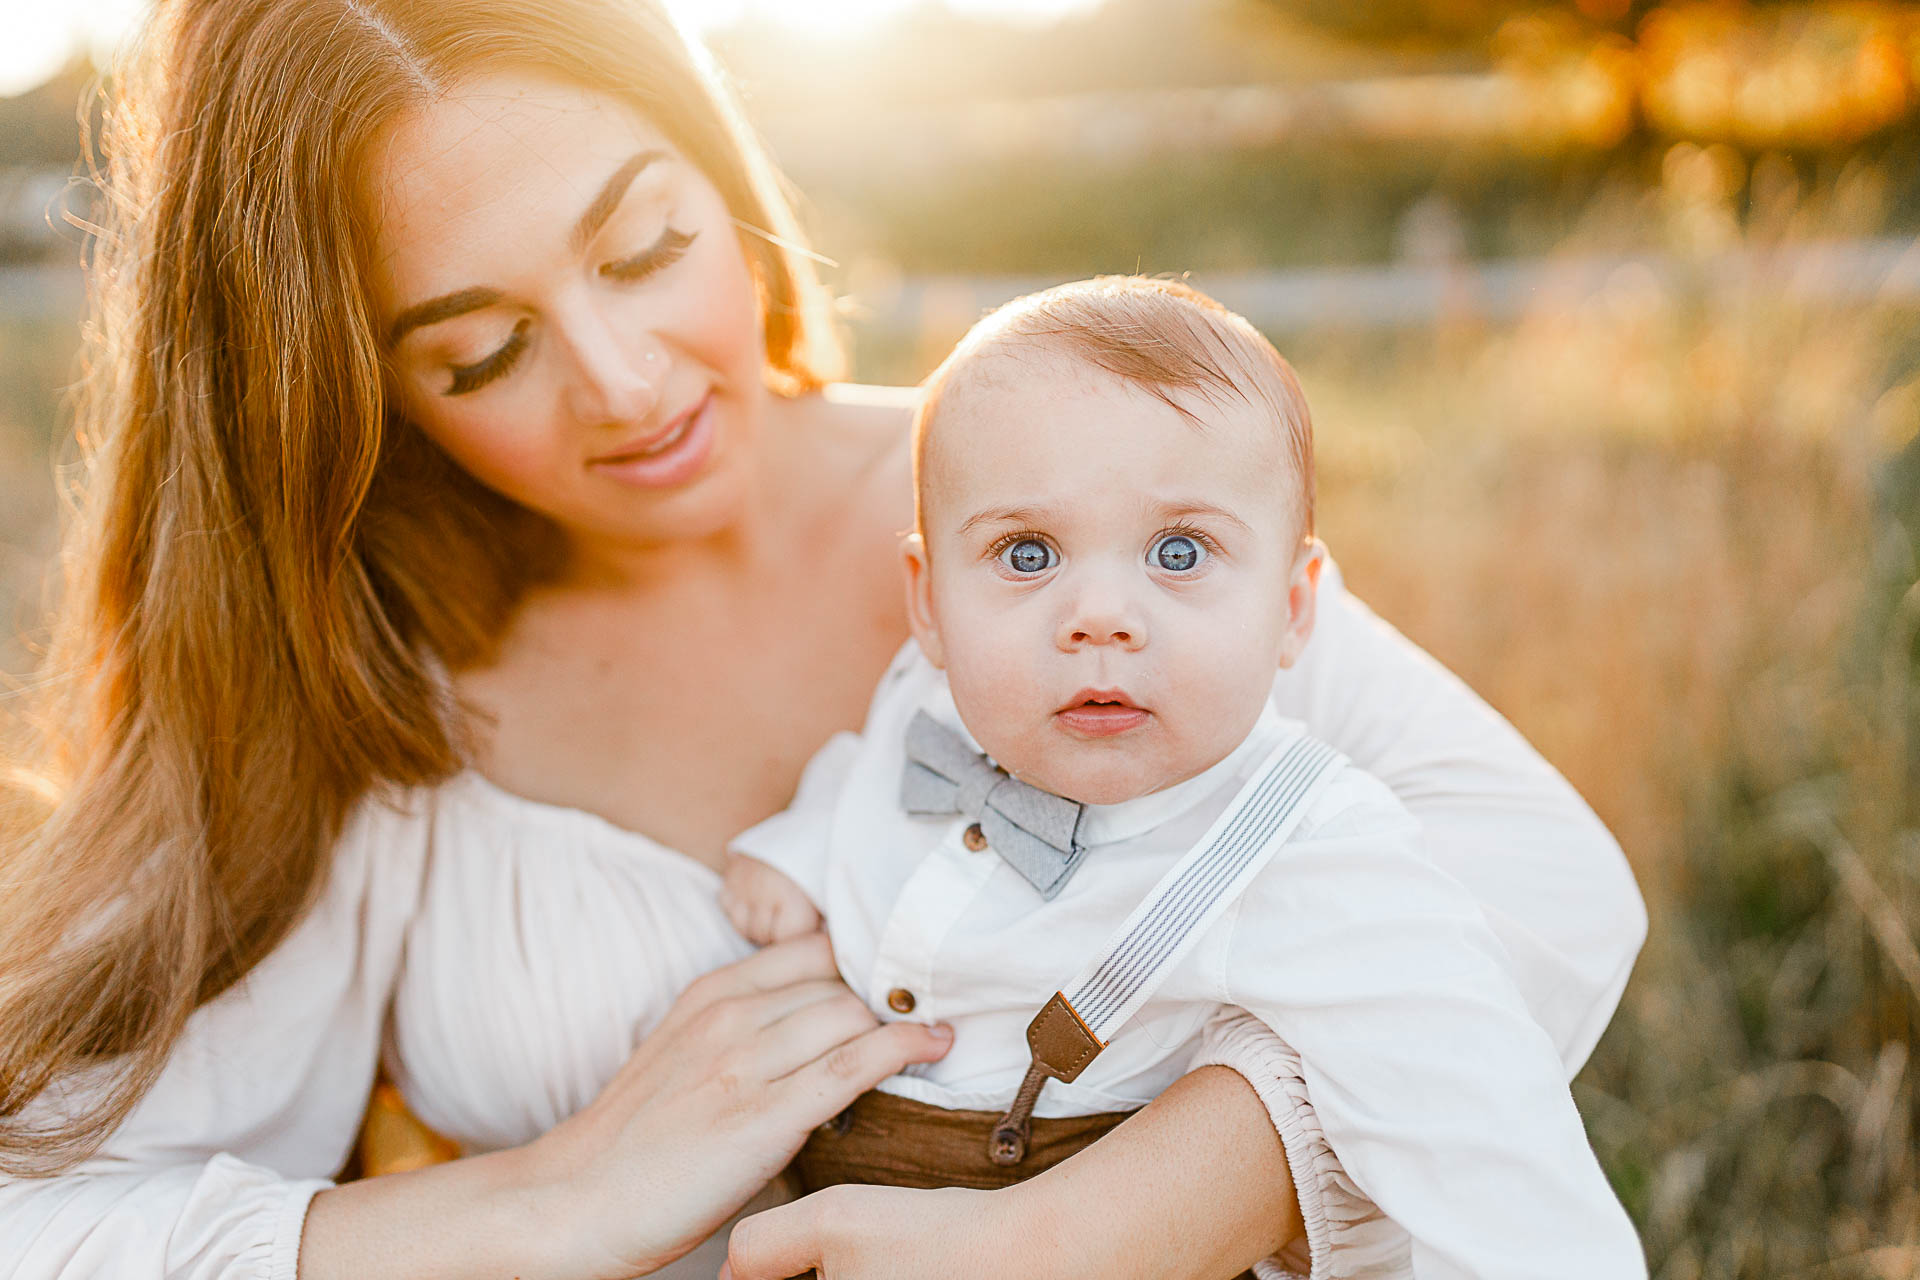 Scituate photographer captures little boy being held by mom in glowing sunset